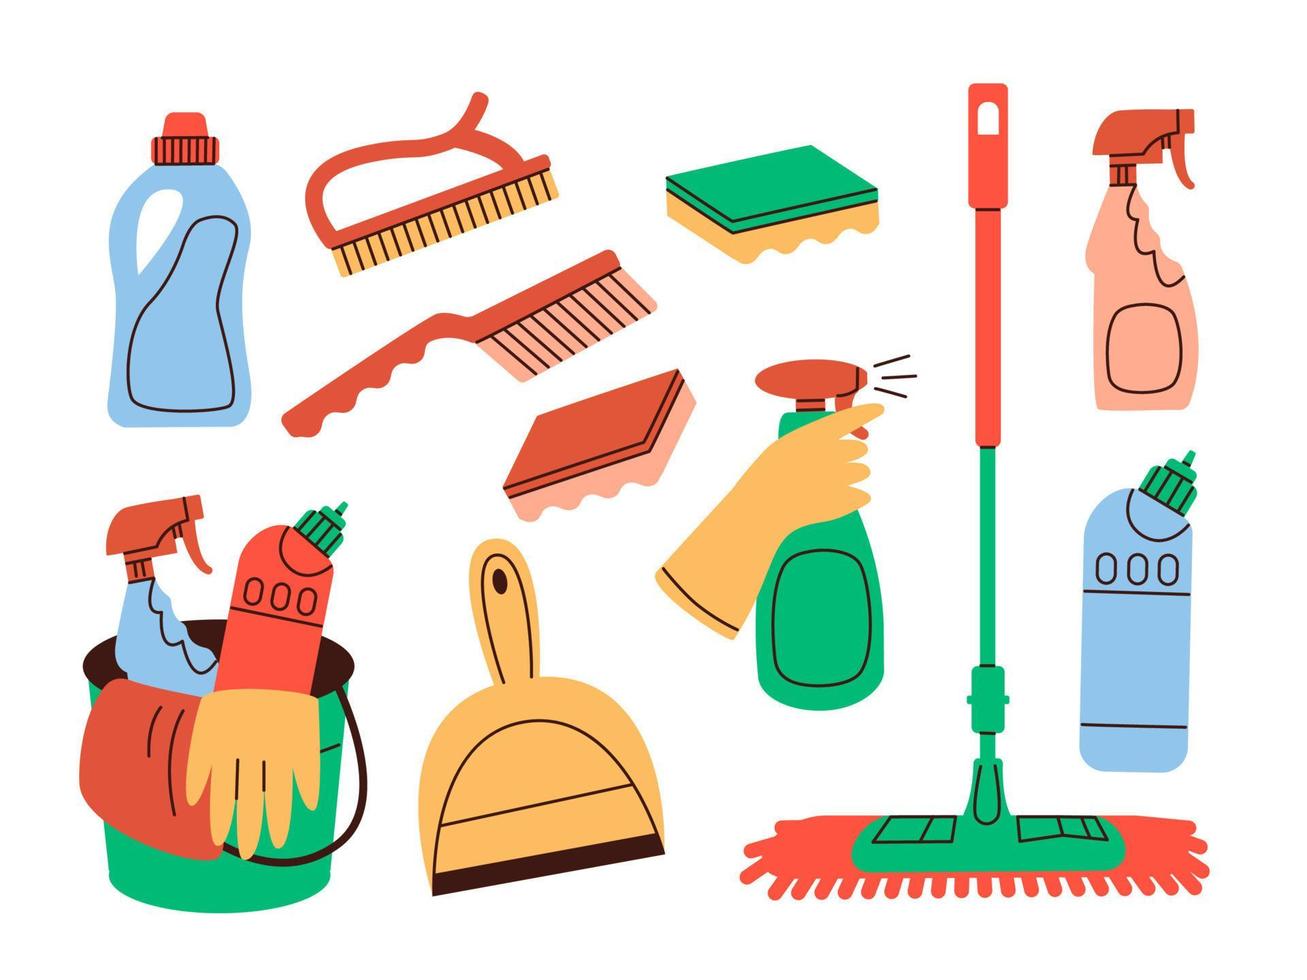 Cleaning products for housework. Home chemical detergent in bottles, household tools, equipment. vector